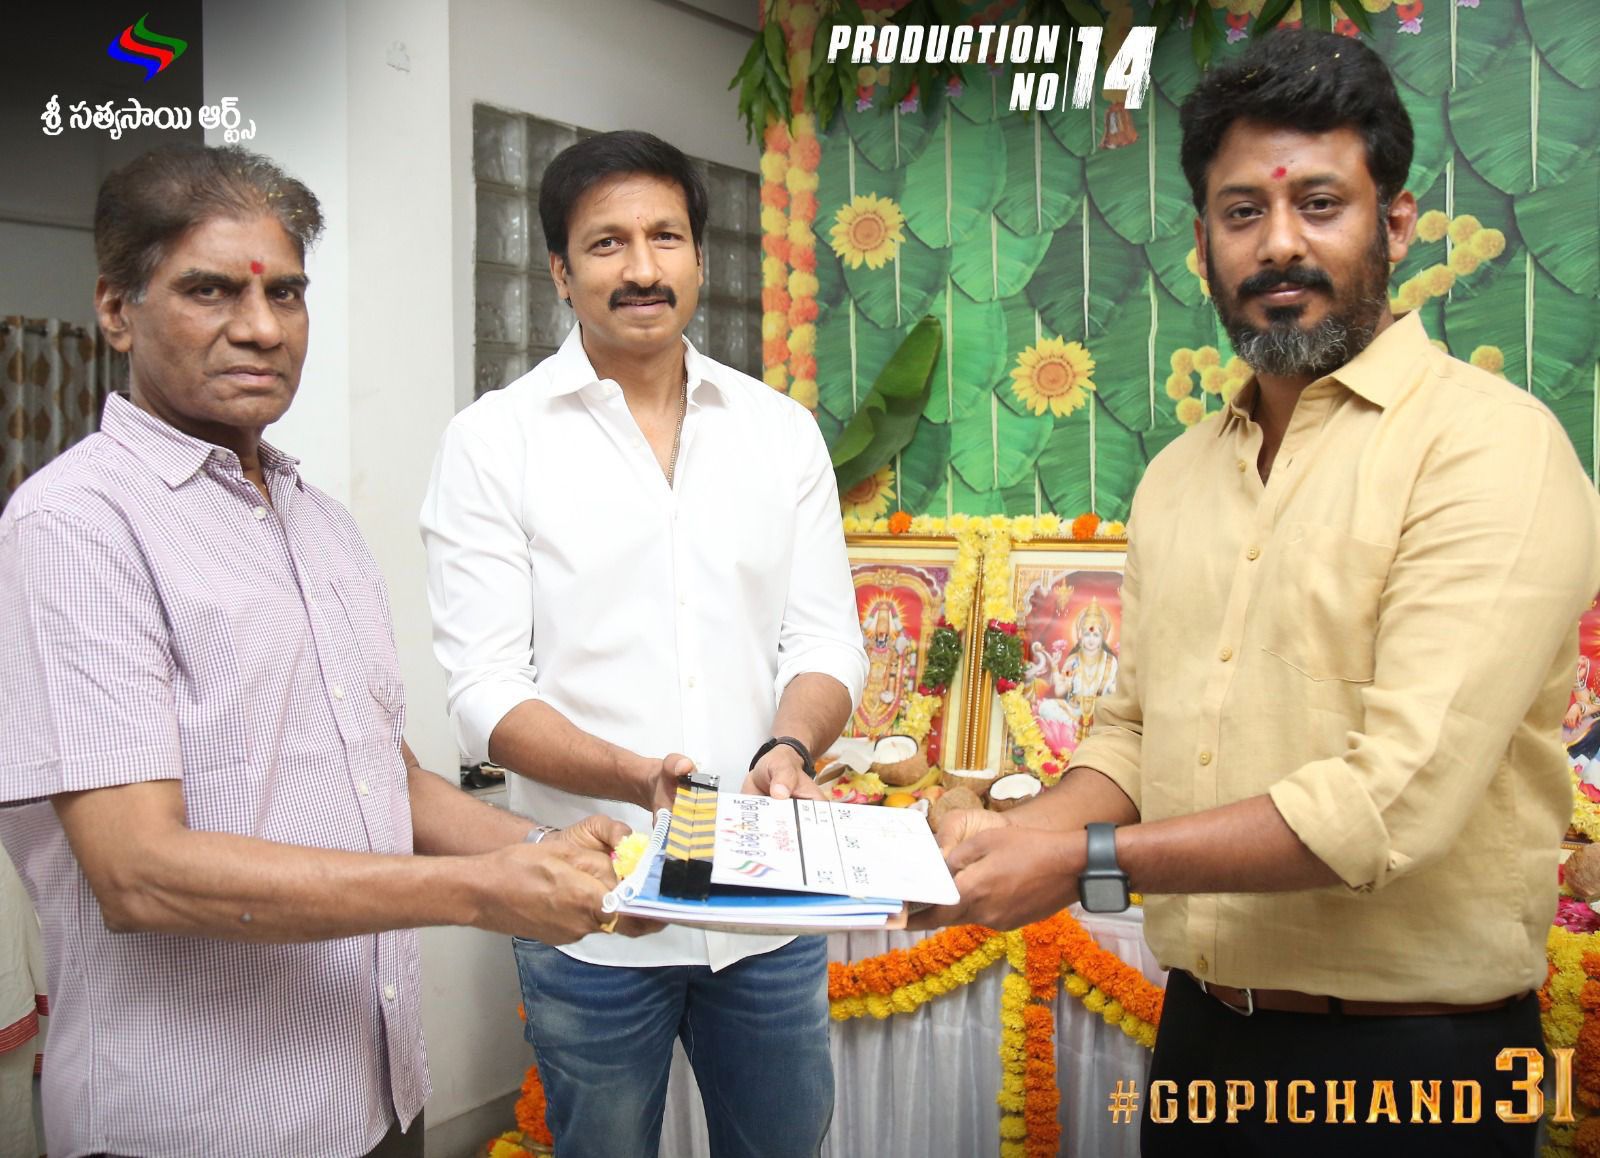 Gopichand31 Film Gets Launched 